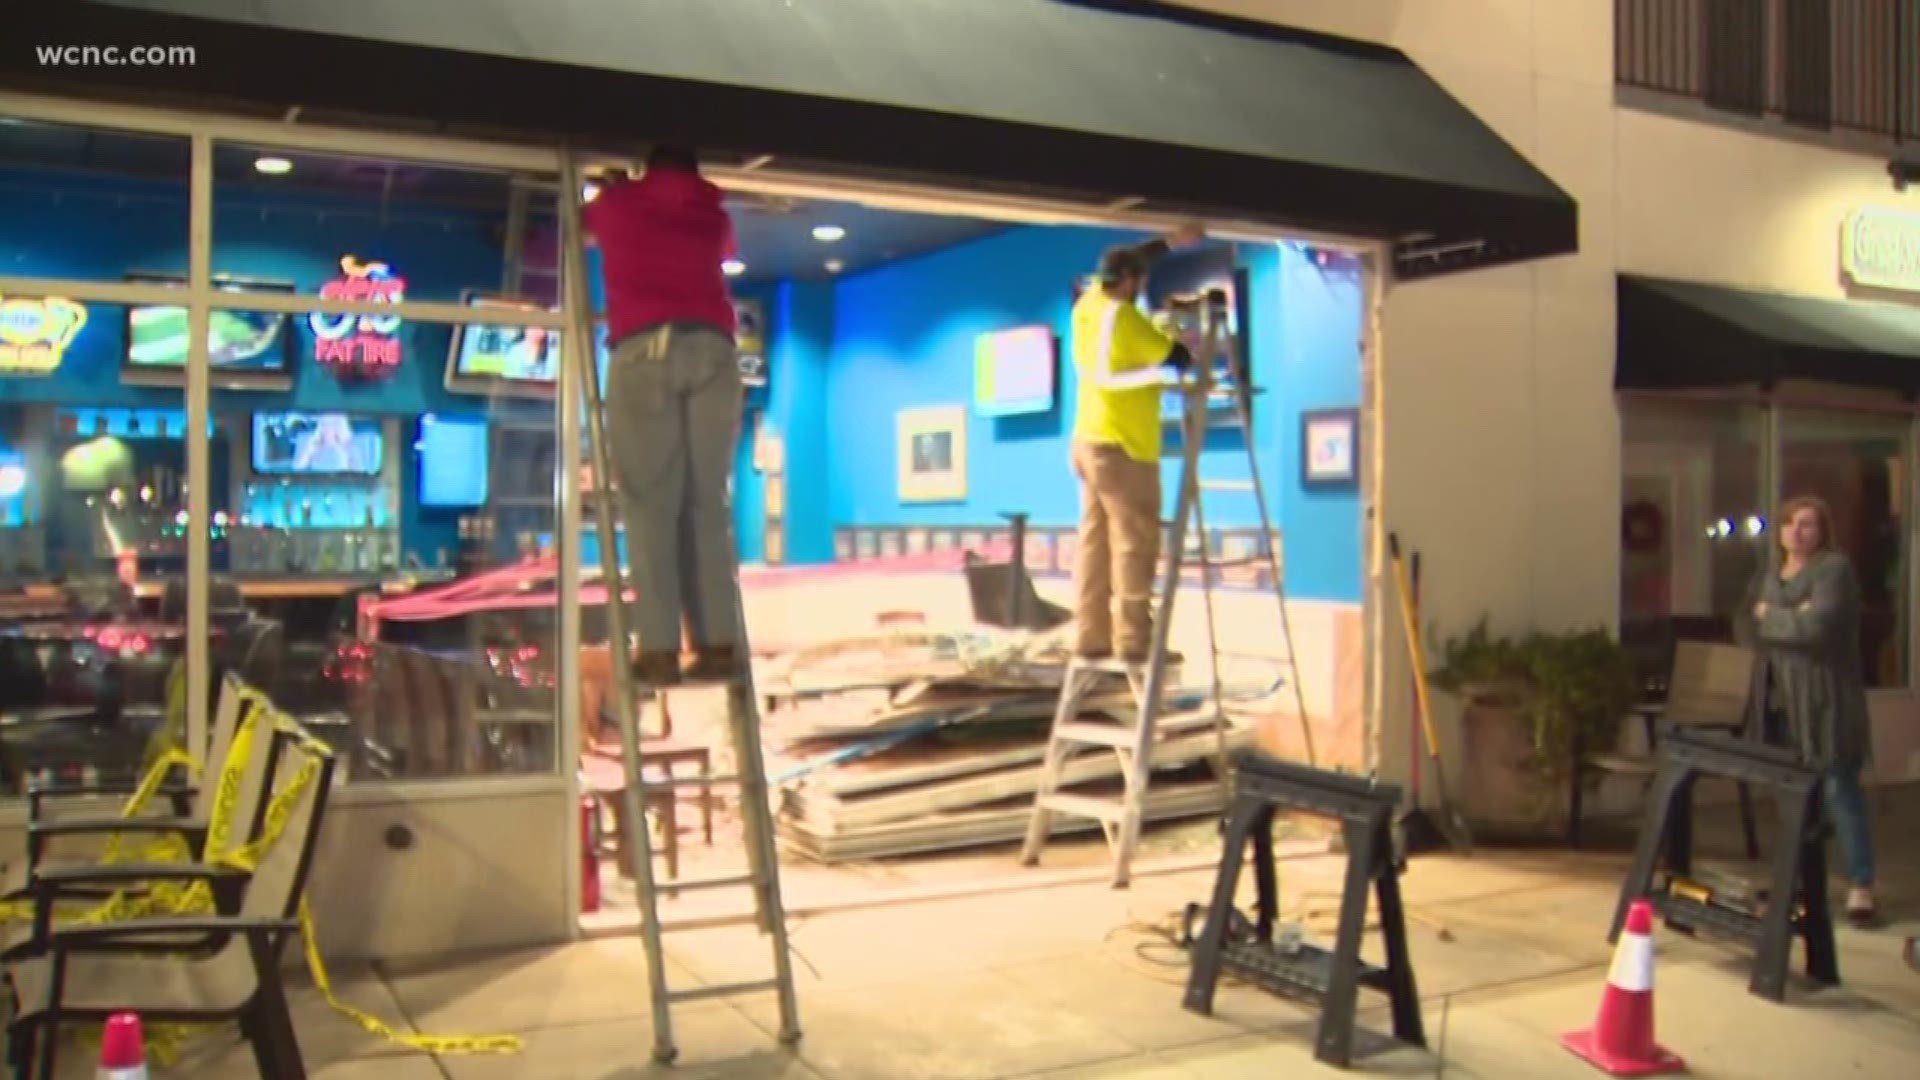 Crews are working to make repairs after a car crashed through the business. Nobody was hurt.